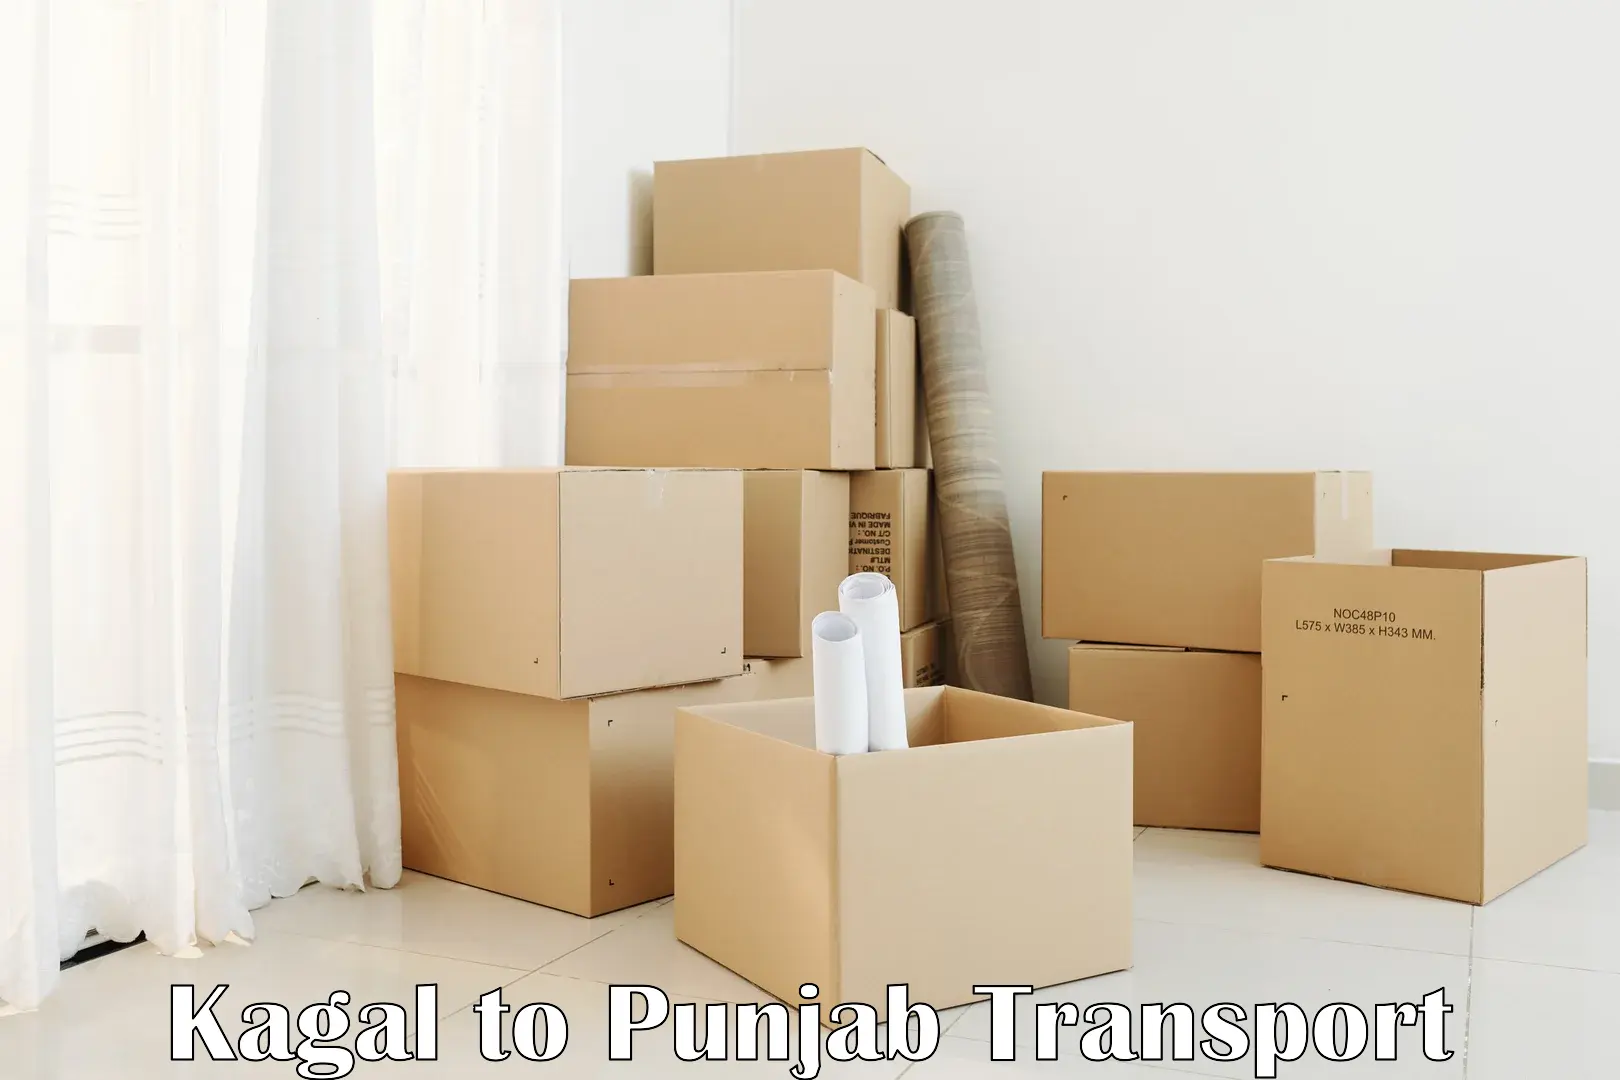 Commercial transport service Kagal to Punjab